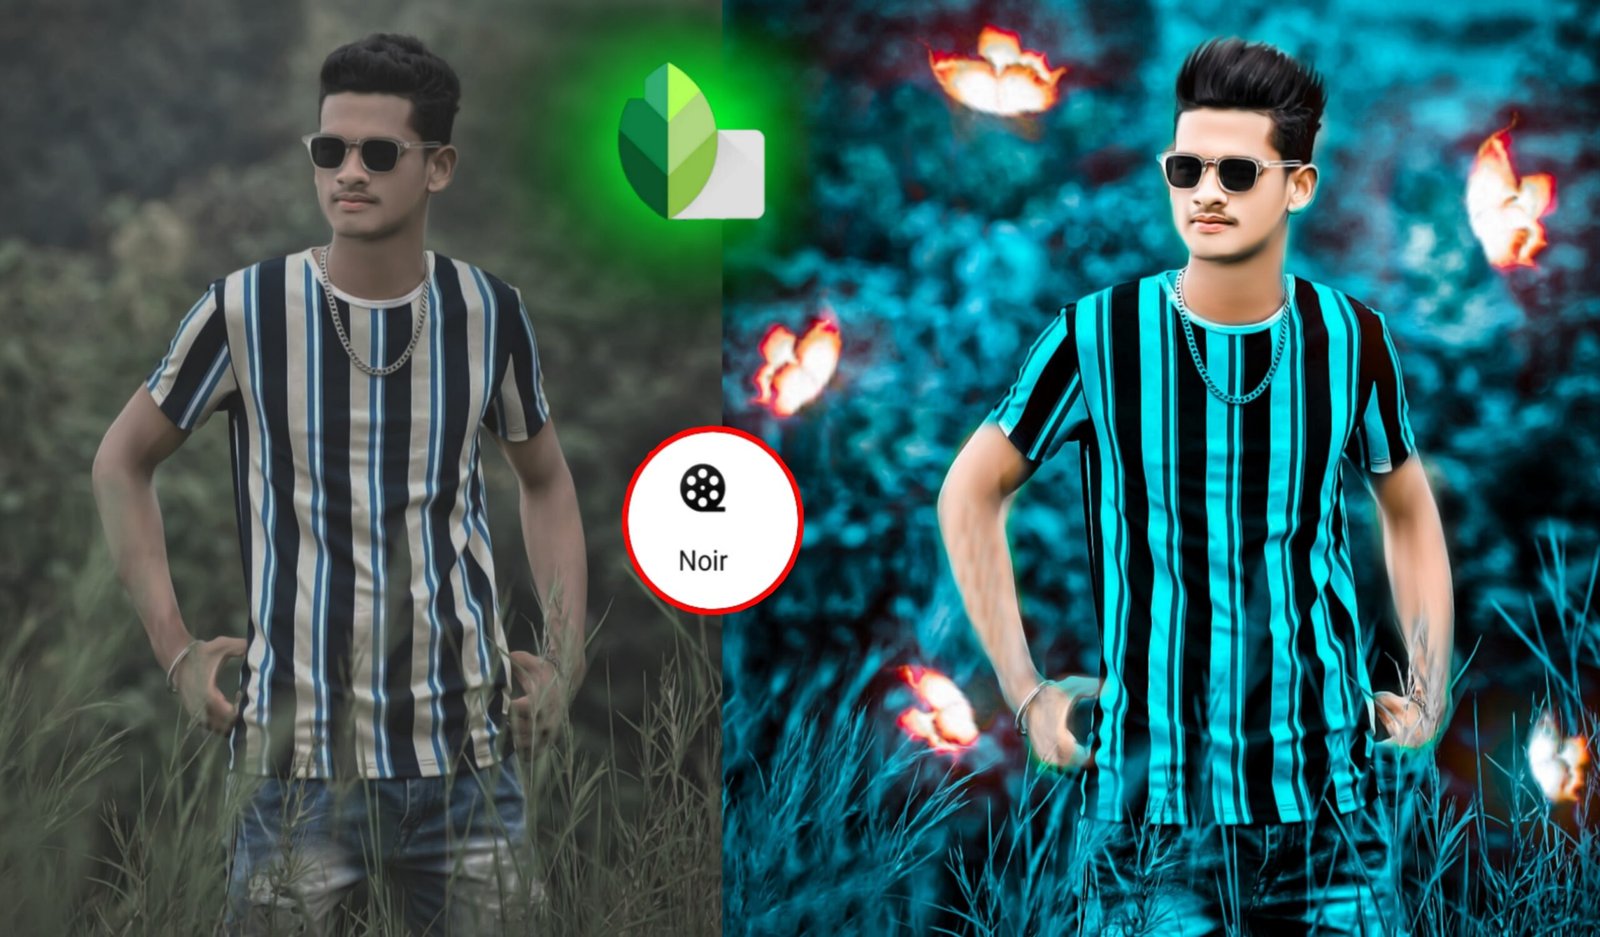 Snapseed backgrounds change vairal photo editing tutorial